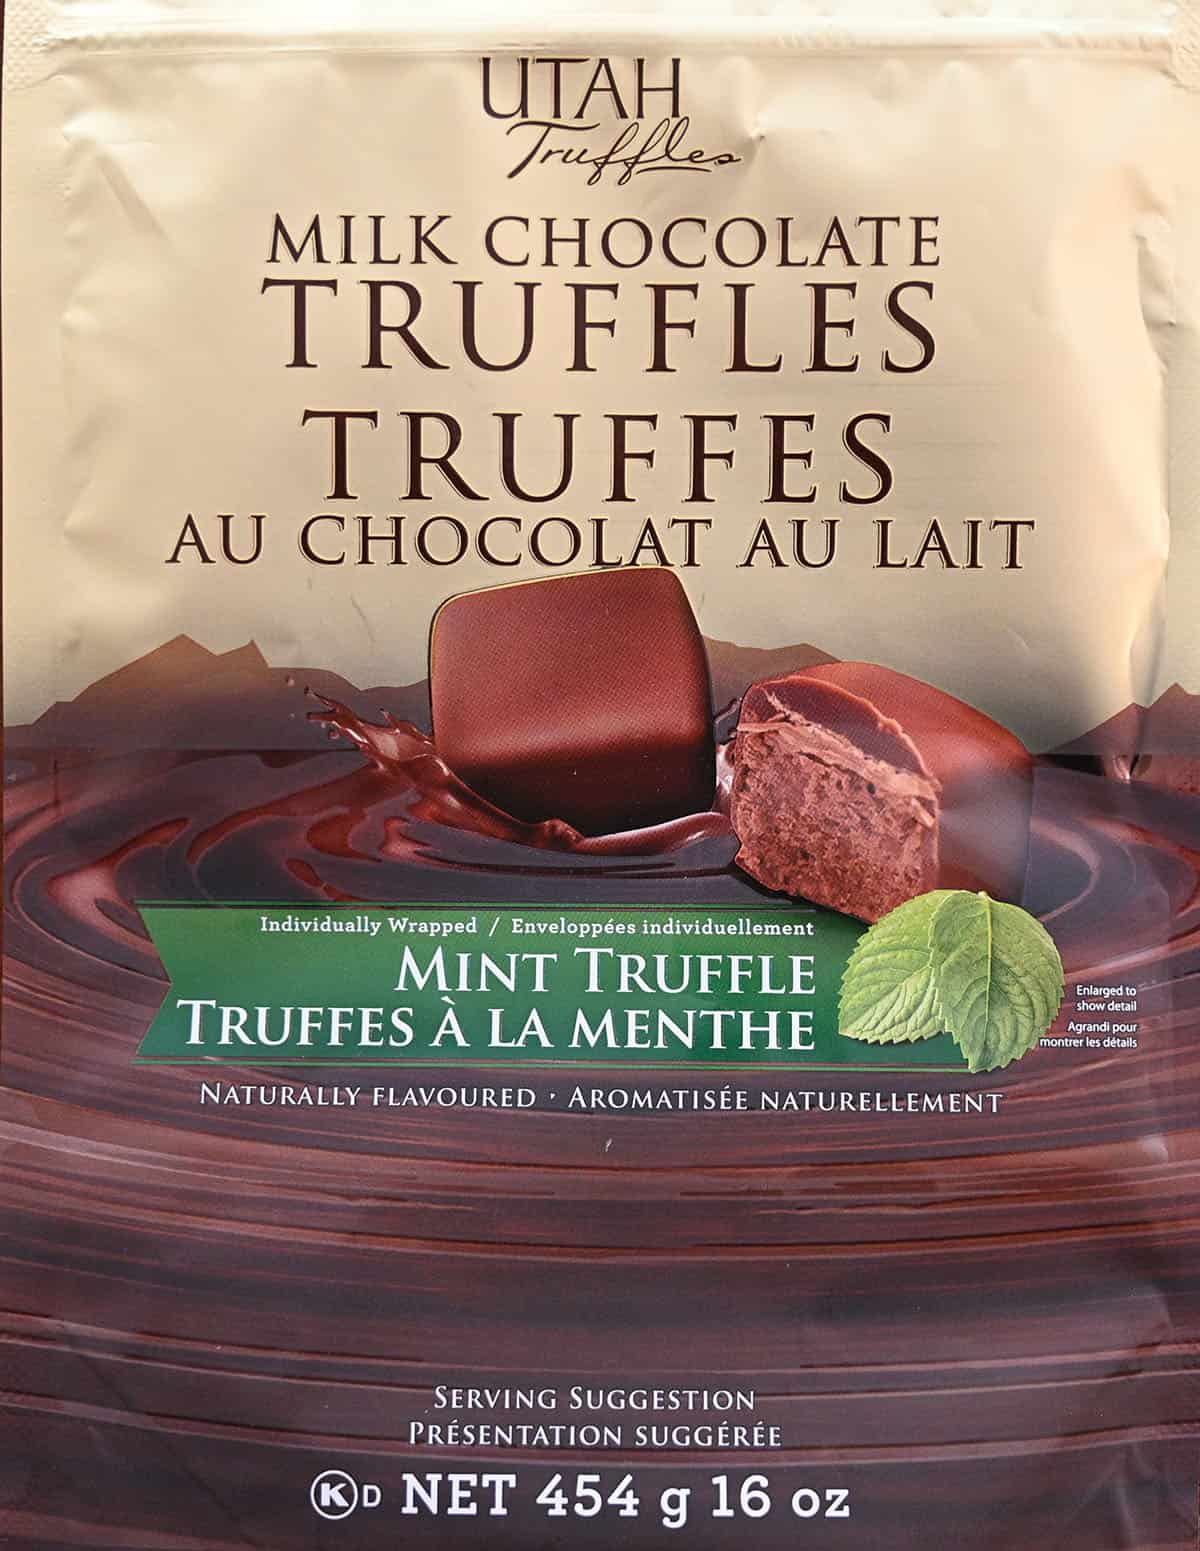 Closeup image of the front of the bag of milk chocolate mint truffles showing size of the bag